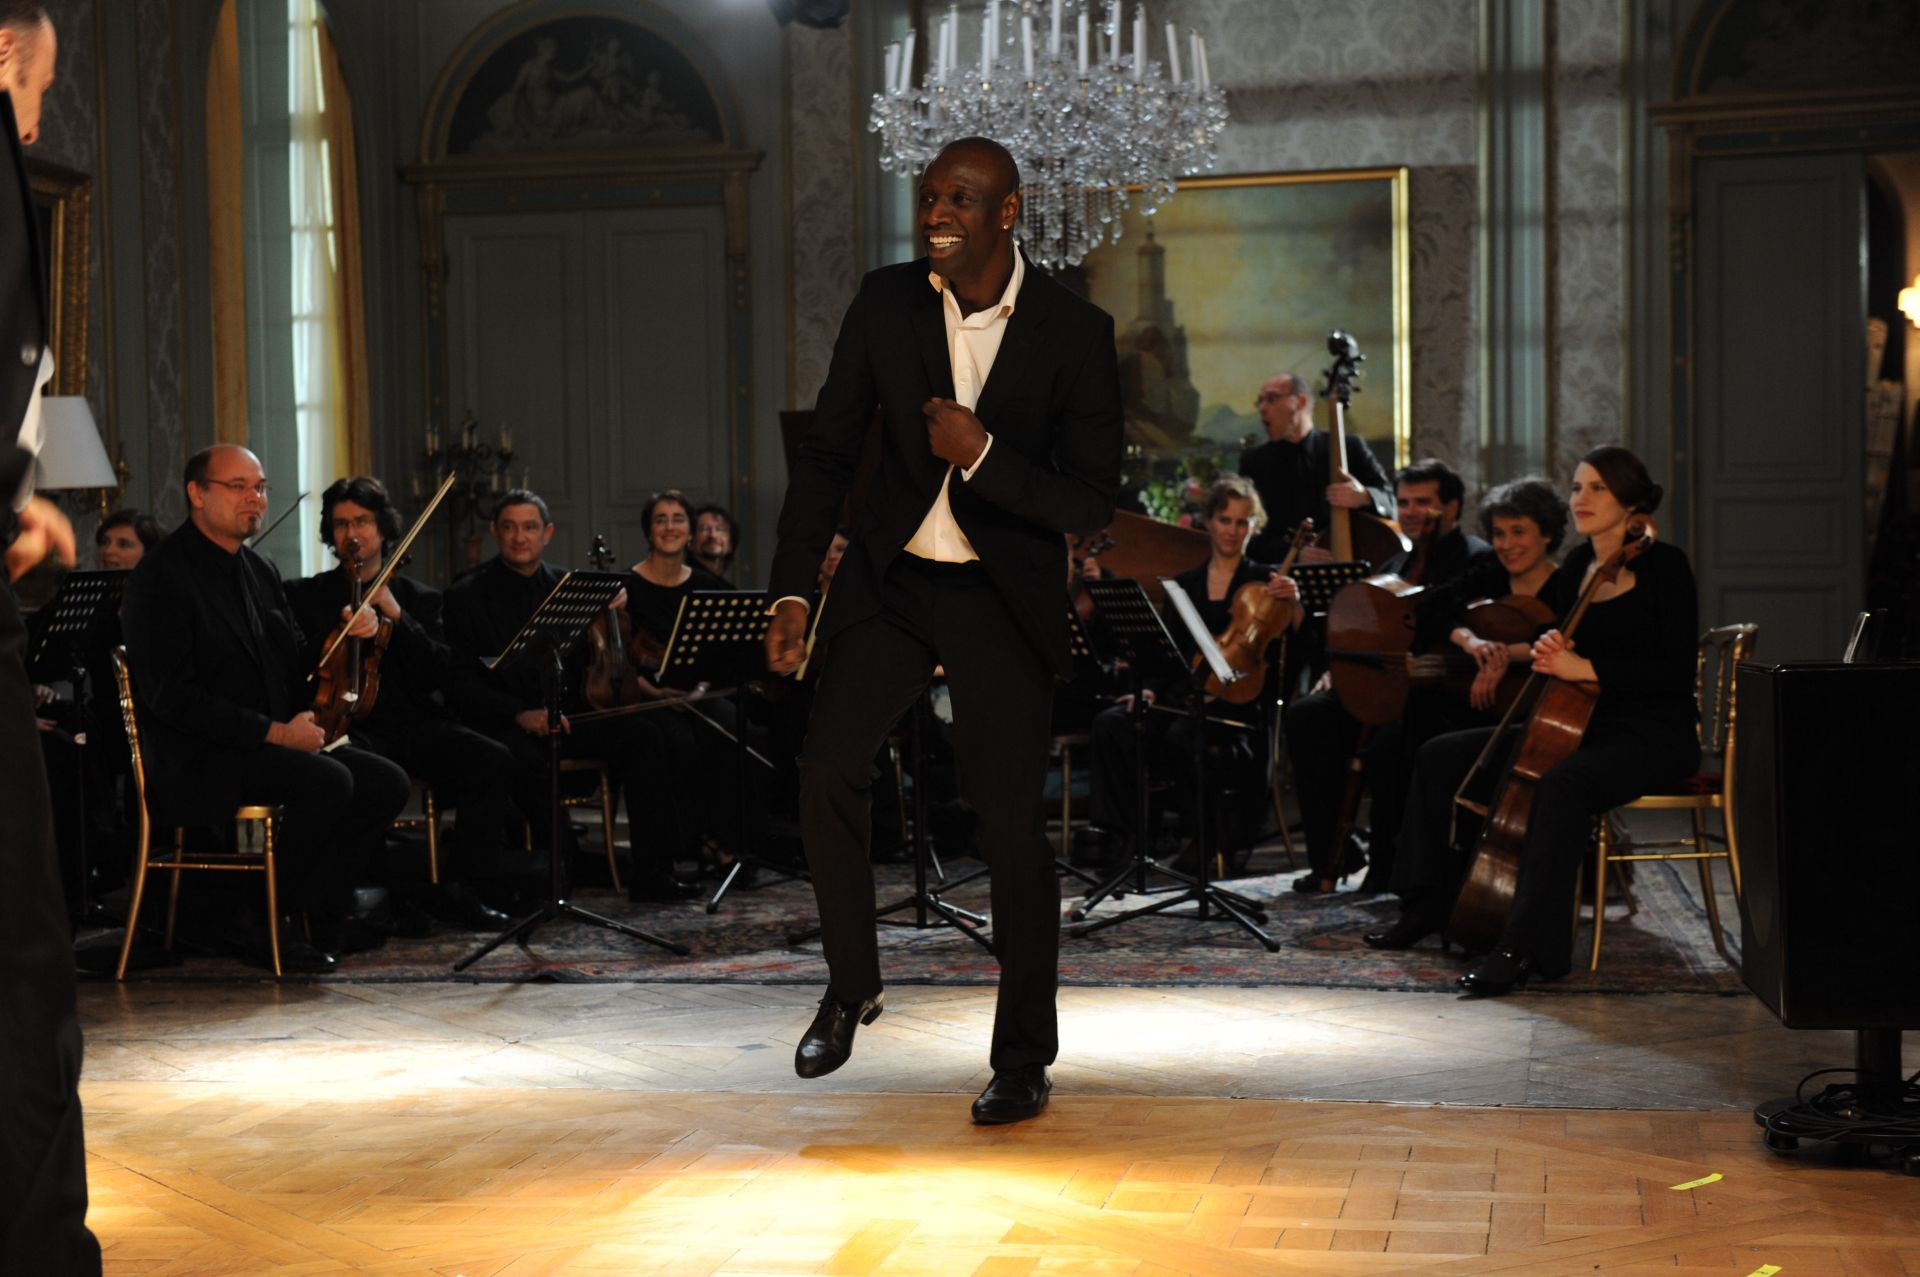 Omar Sy, Le Capriccio Français, and Philippe Le Fevre in The Intouchables (2011)